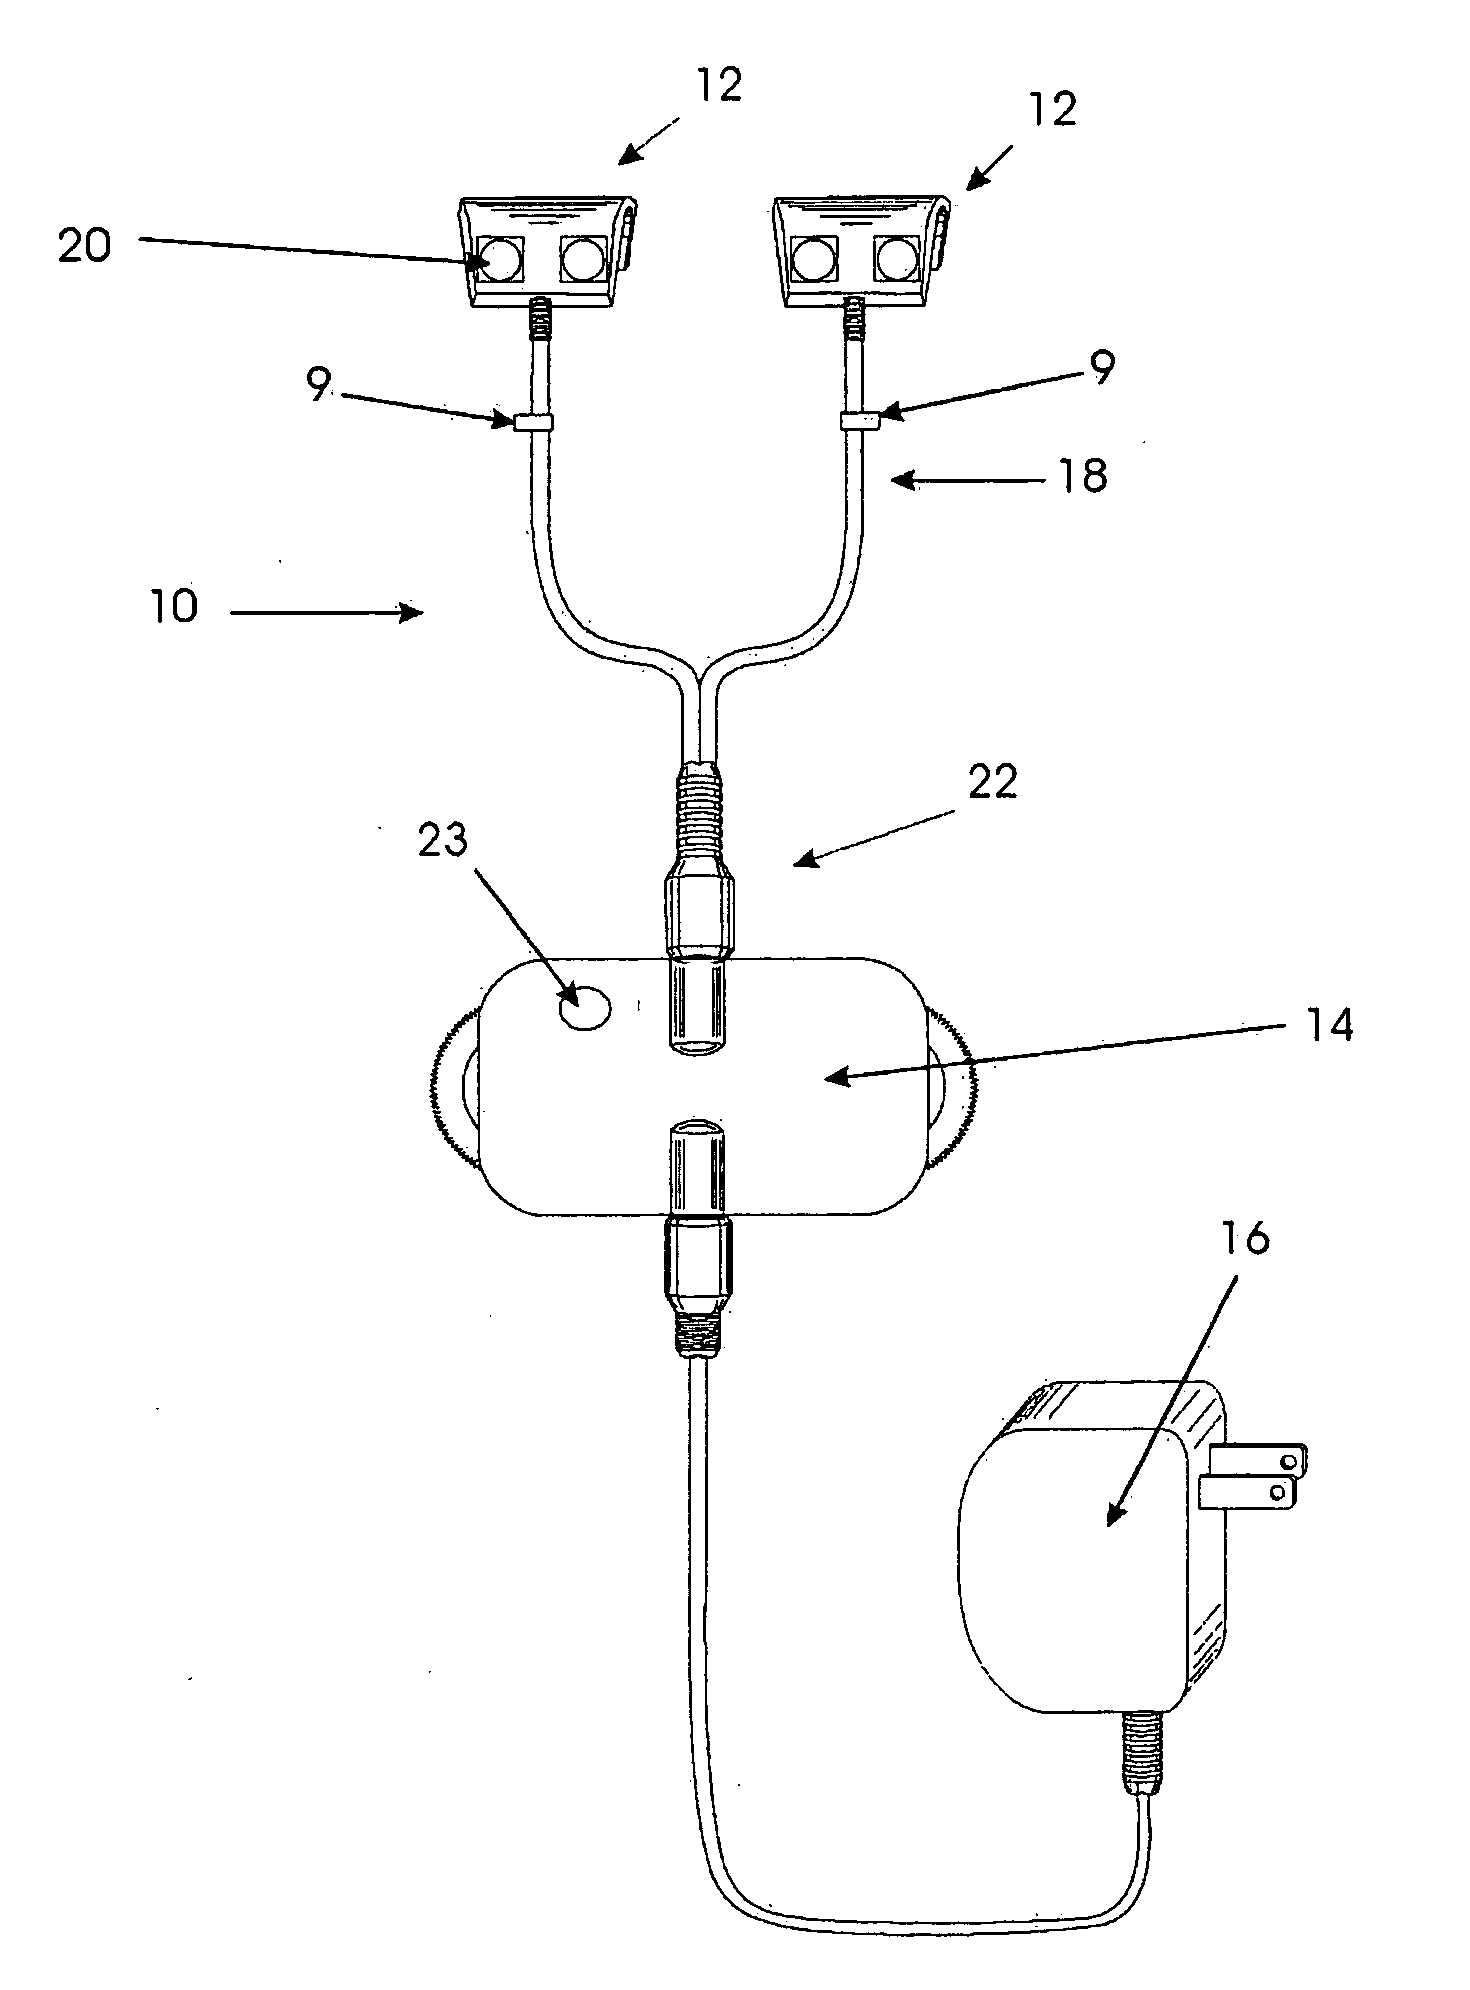 Device for unilateral or bilateral illumination of oral cavity